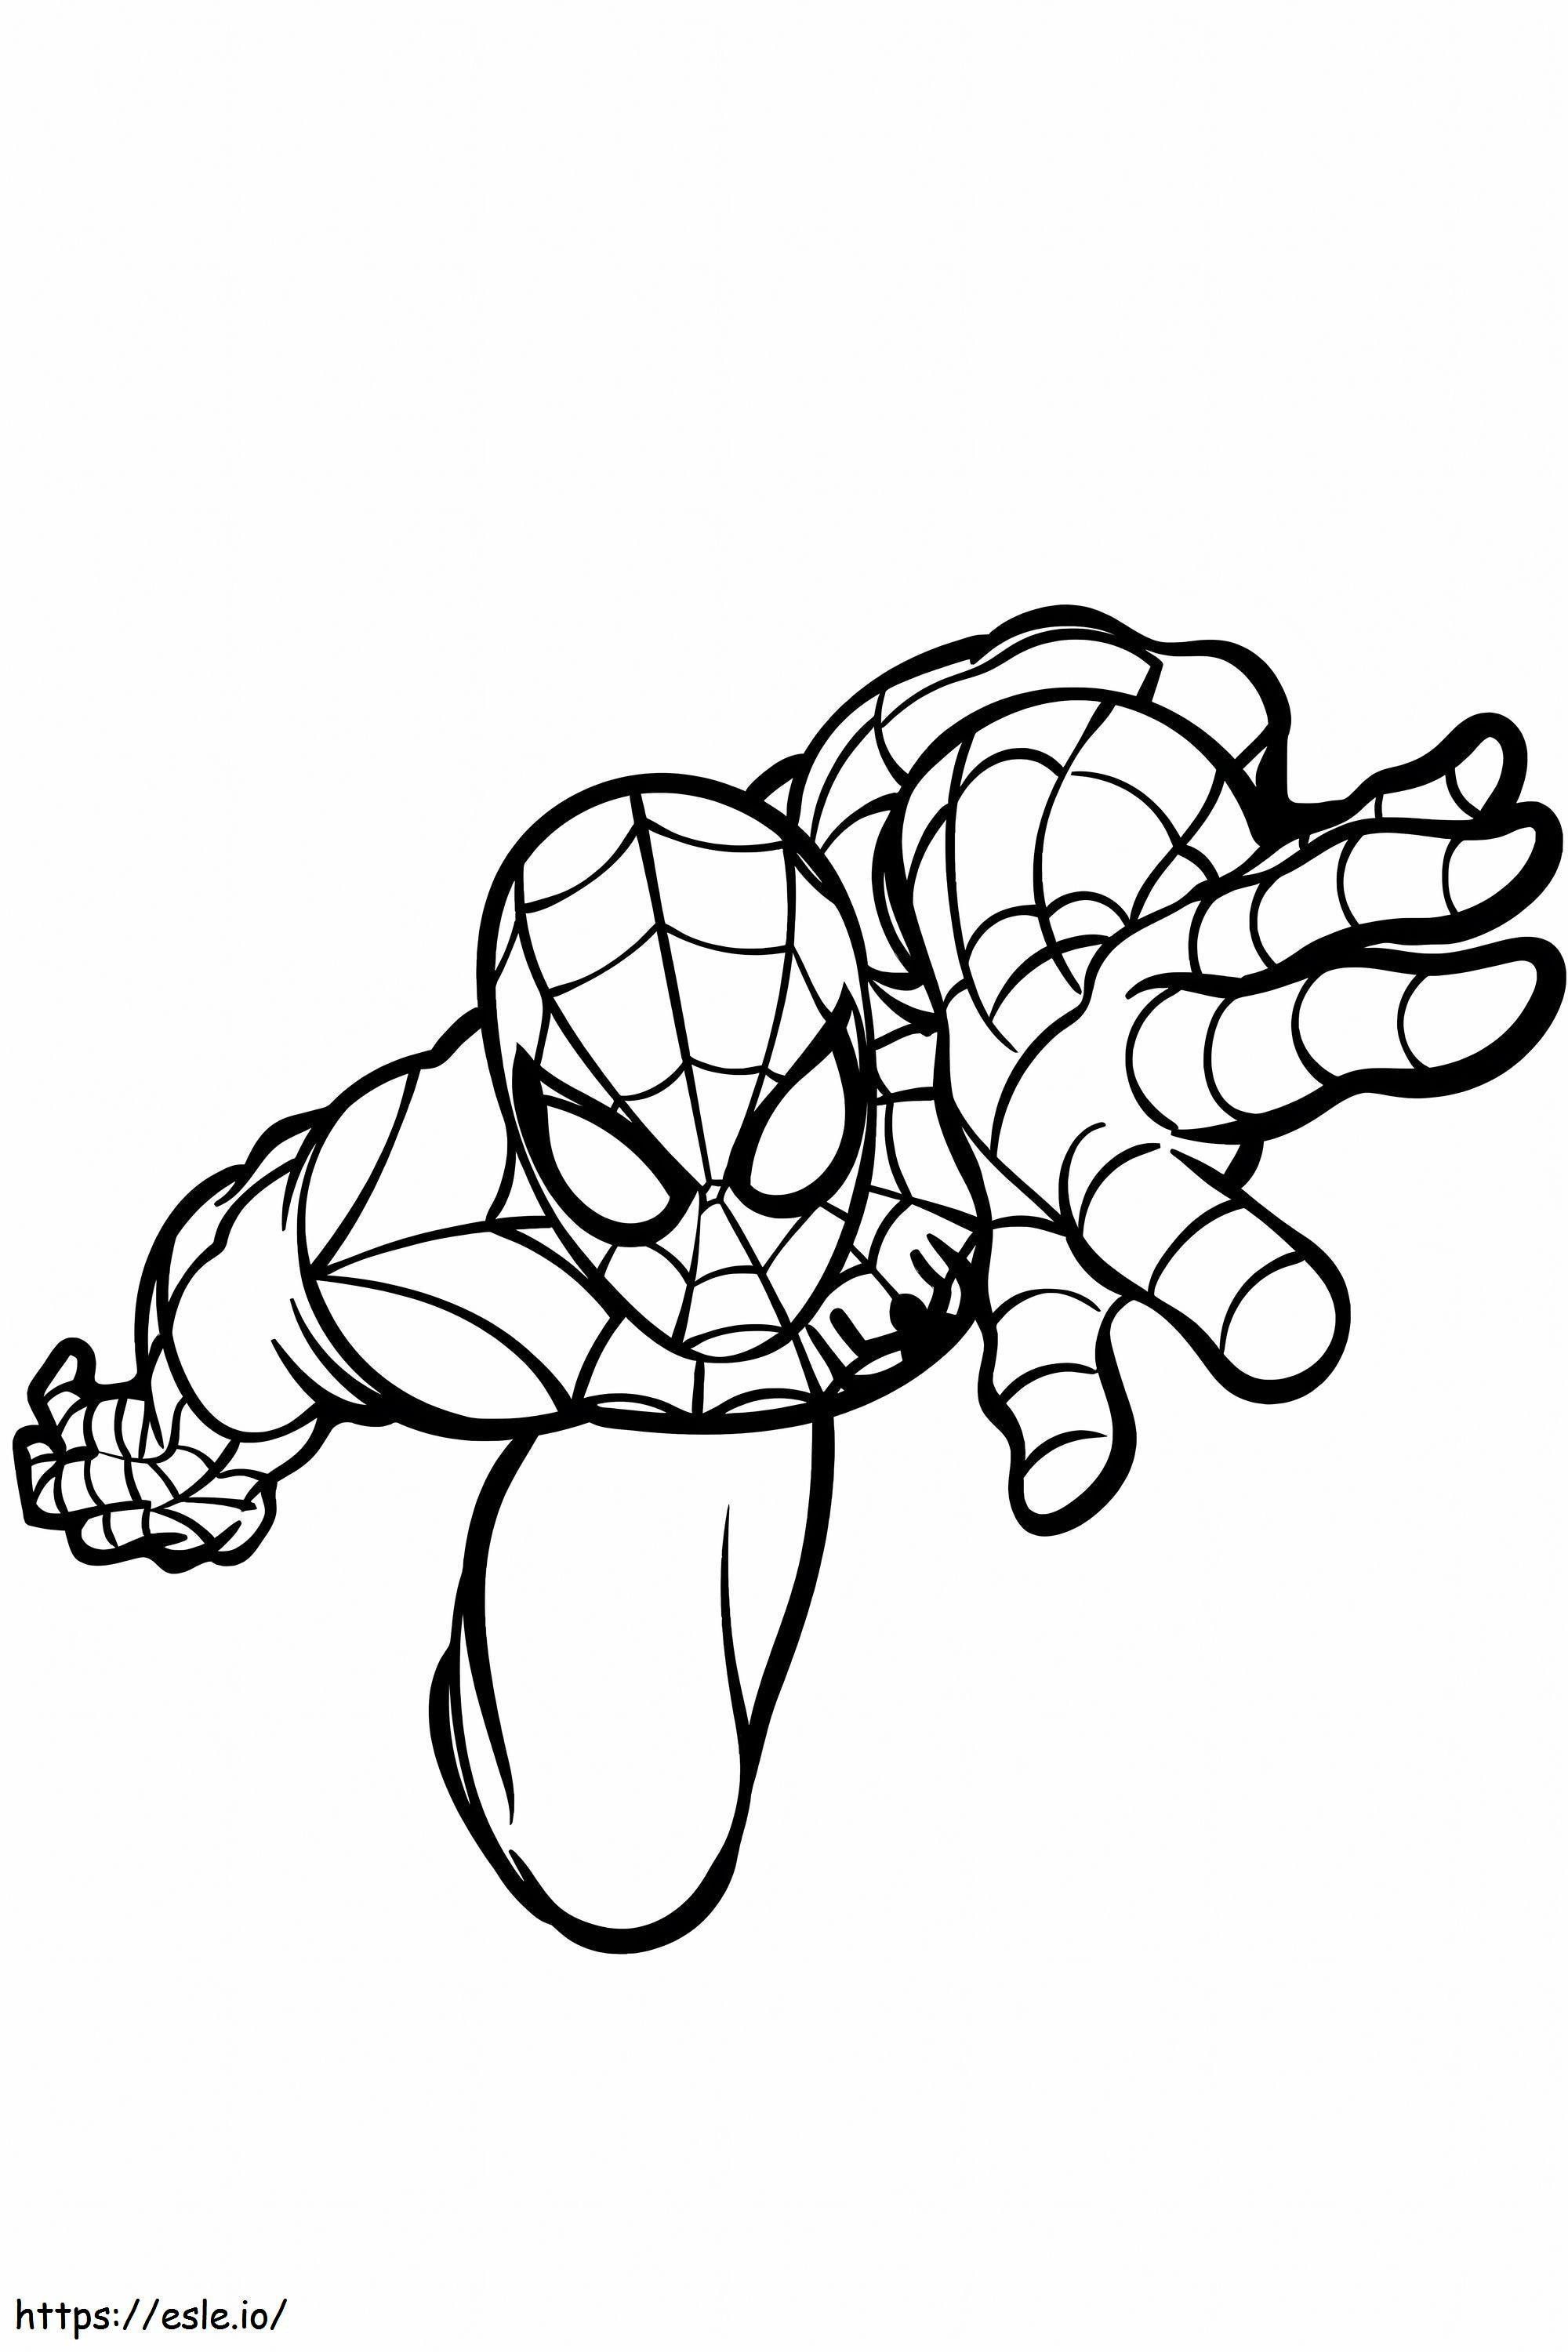 Spiderman Climbing coloring page